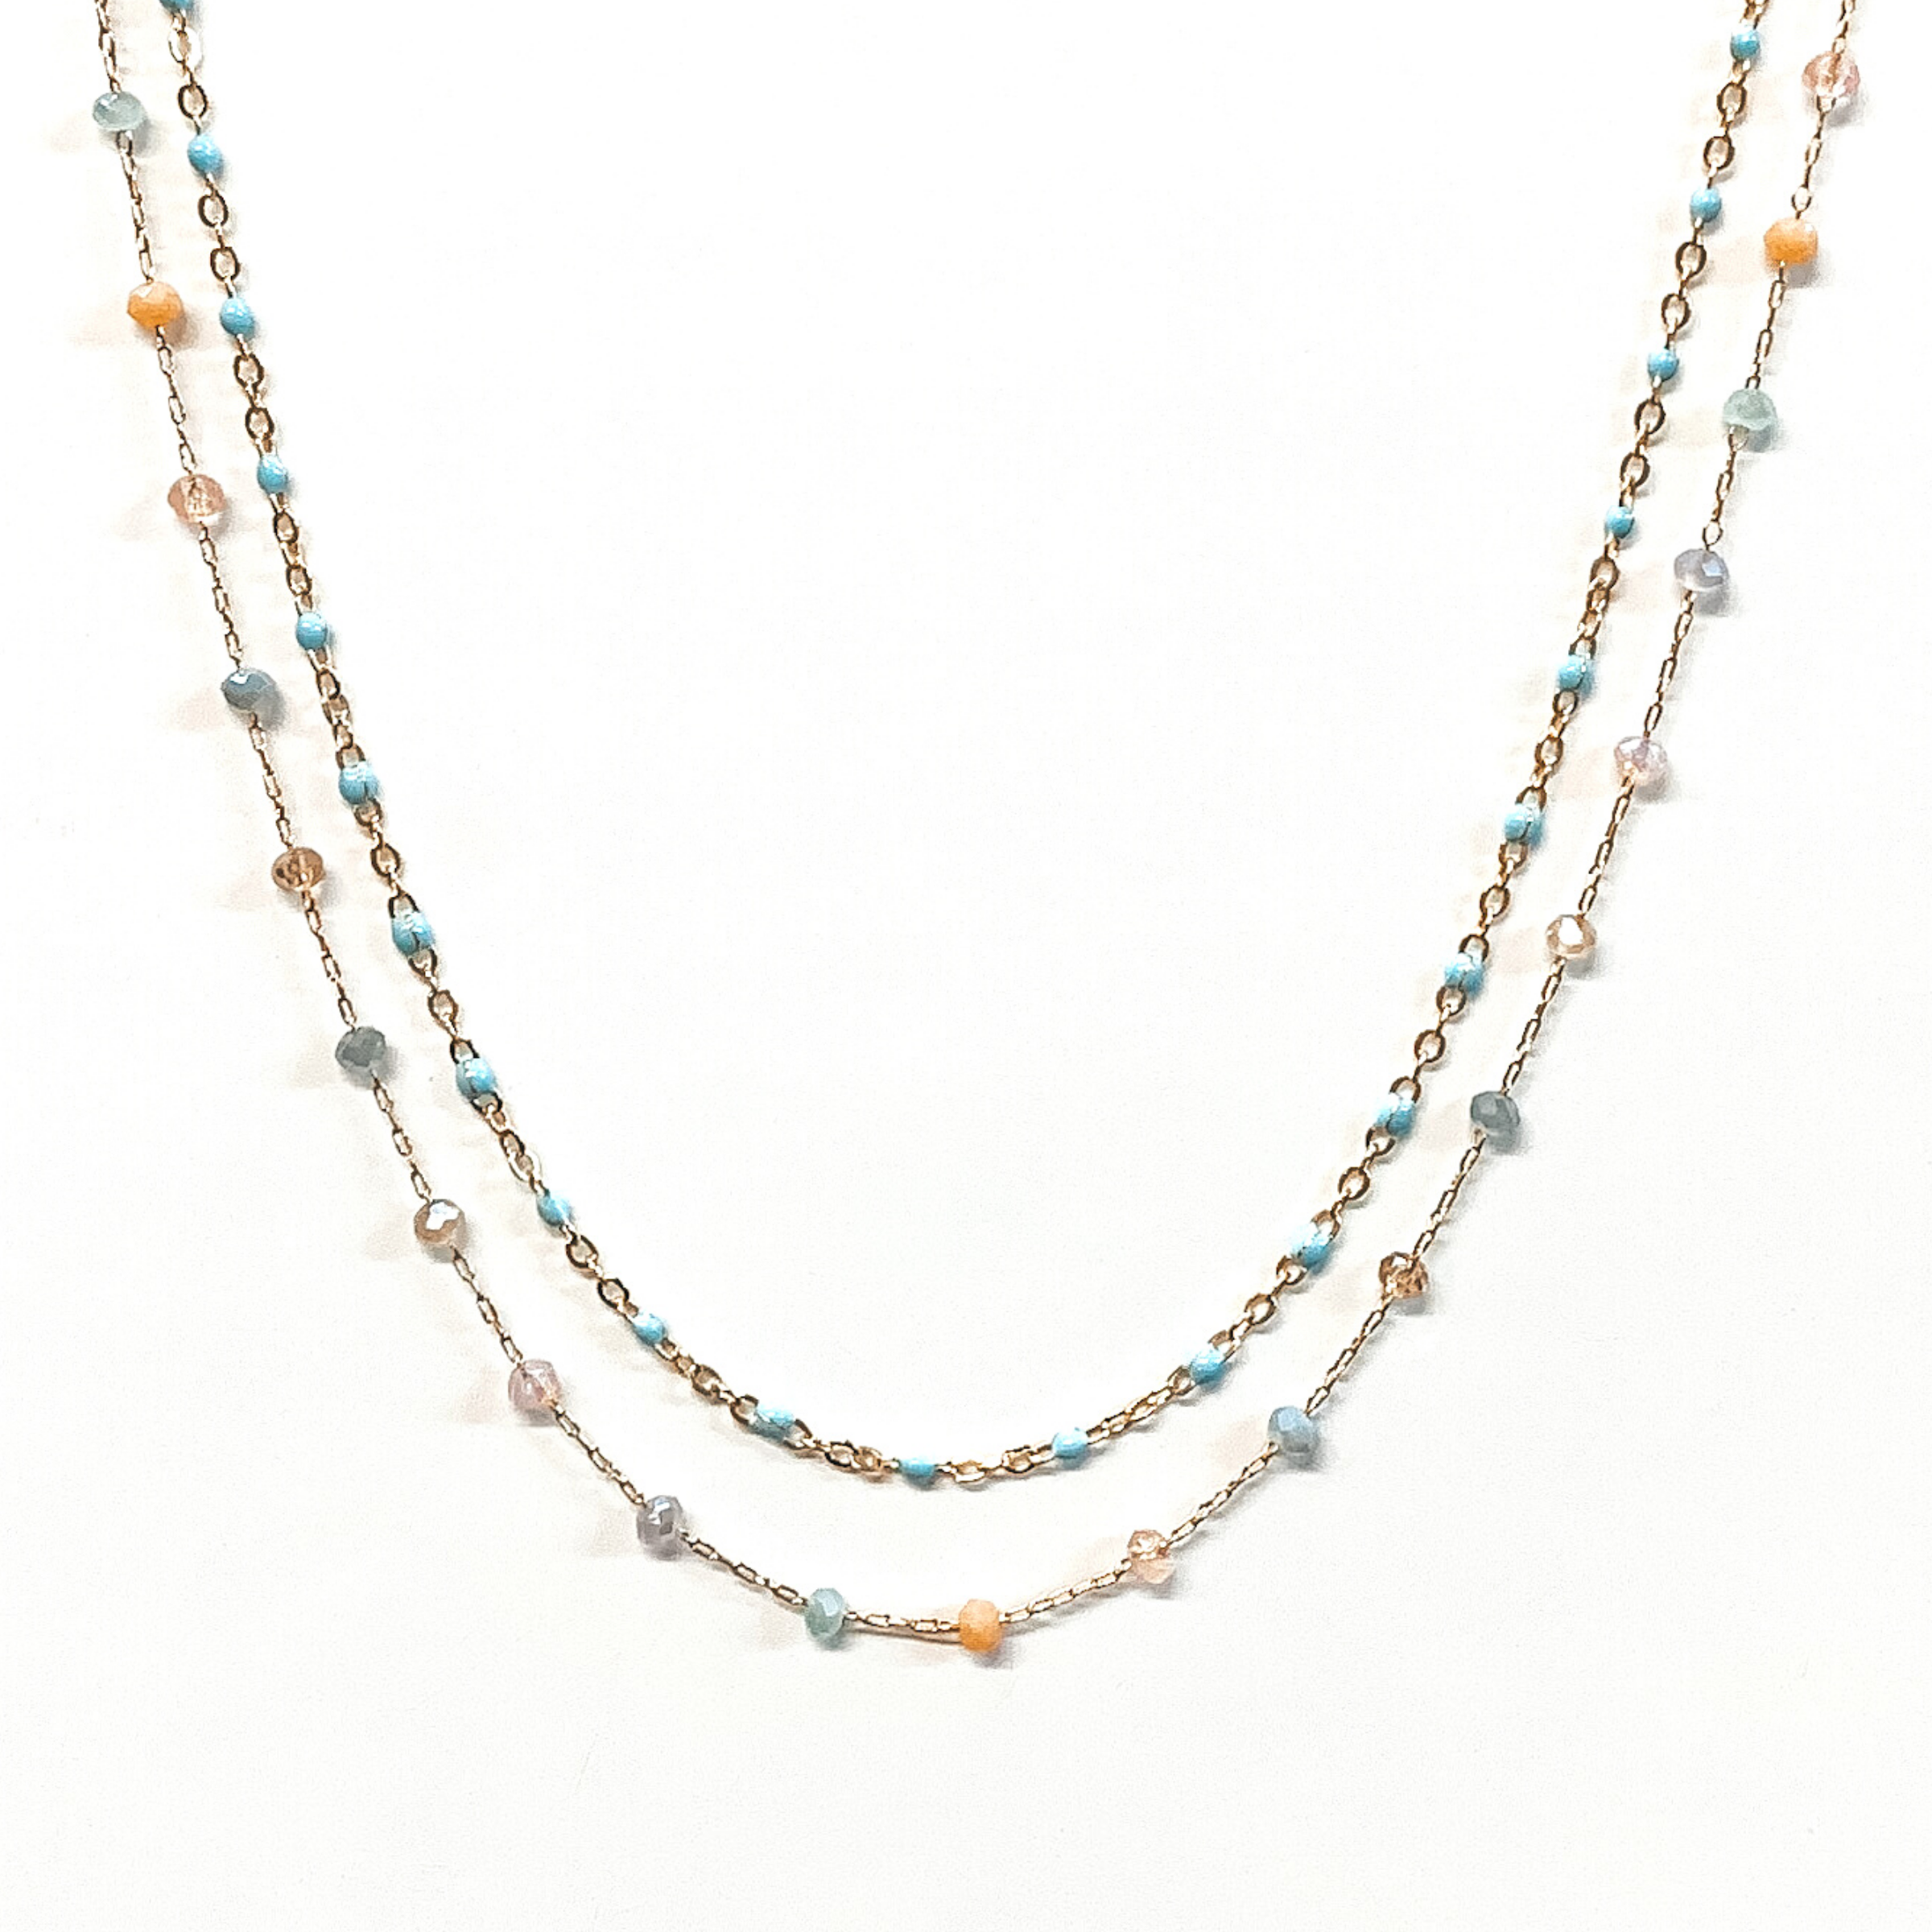 The first strand is a gold chain with small, baby blue bead spacers. The second gold chain has small, crystal bead spacers in a mix light blue, pink, and tan. This necklace is pictured on a white background.